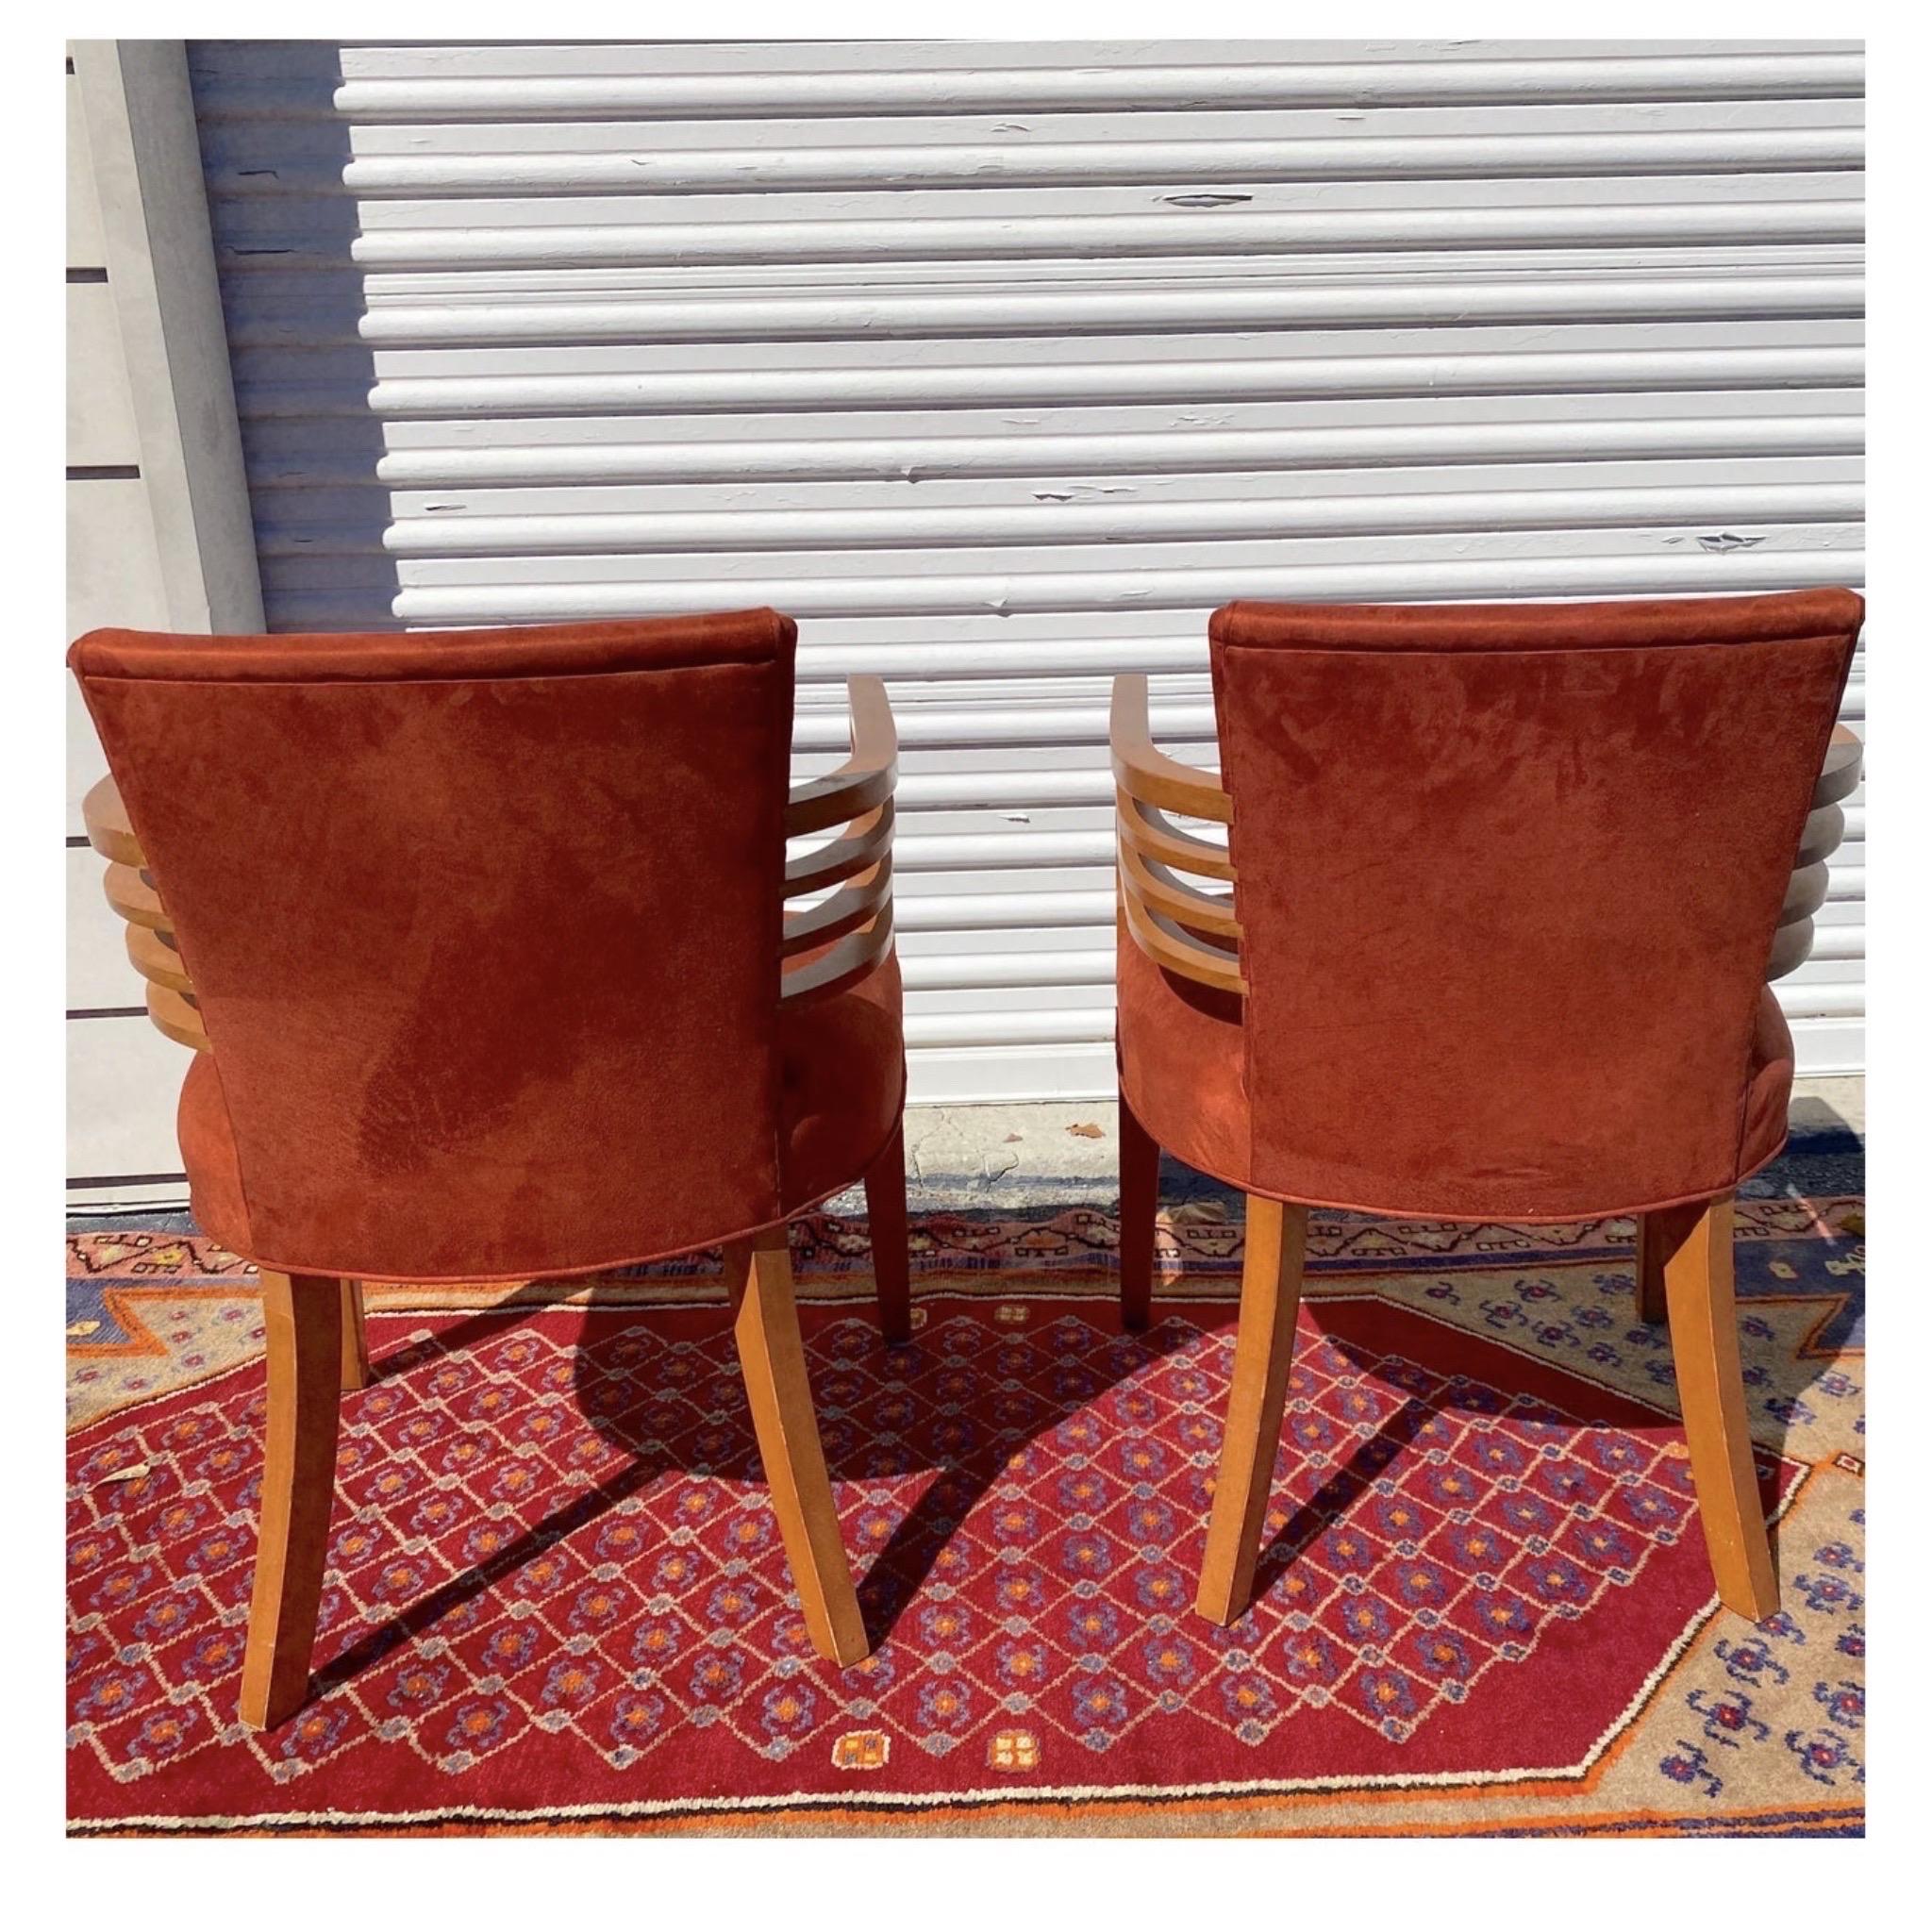 Upholstery Set of 4 Knoll Art Deco Arm Chairs